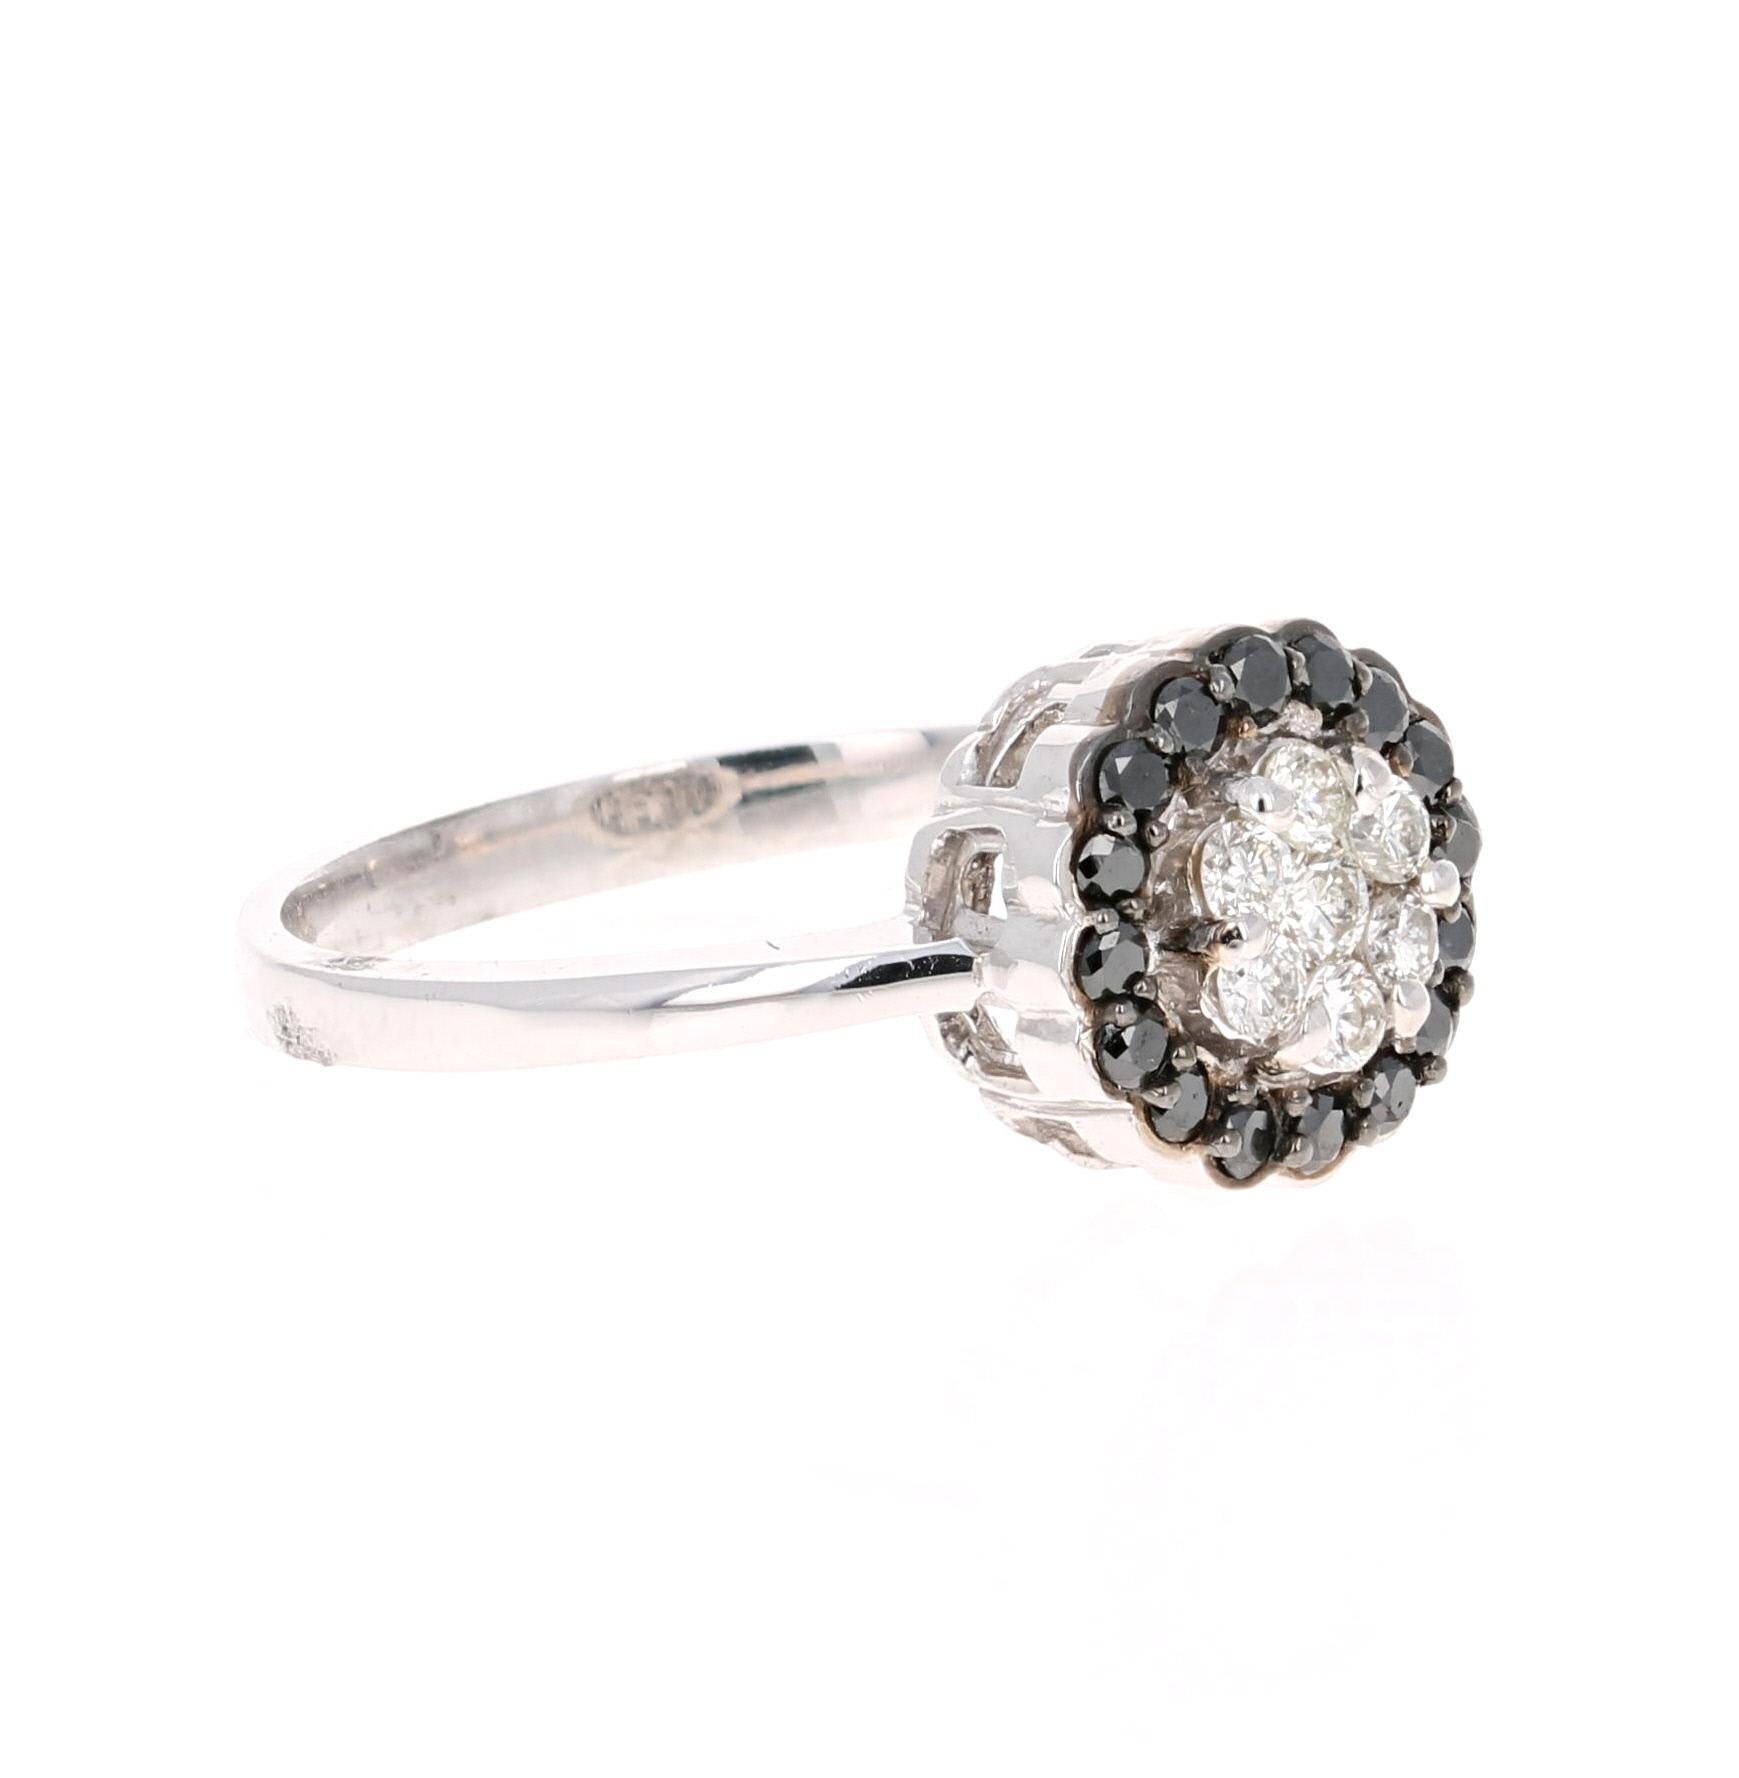 This Black and White Diamond Ring is a cute everyday ring for those looking for something fun and pretty

The flower design has 7 Round Cut Diamonds that weigh 0.21 carats and the floating halo has 16 Black Round Cut Diamonds that weigh 0.24 carats.